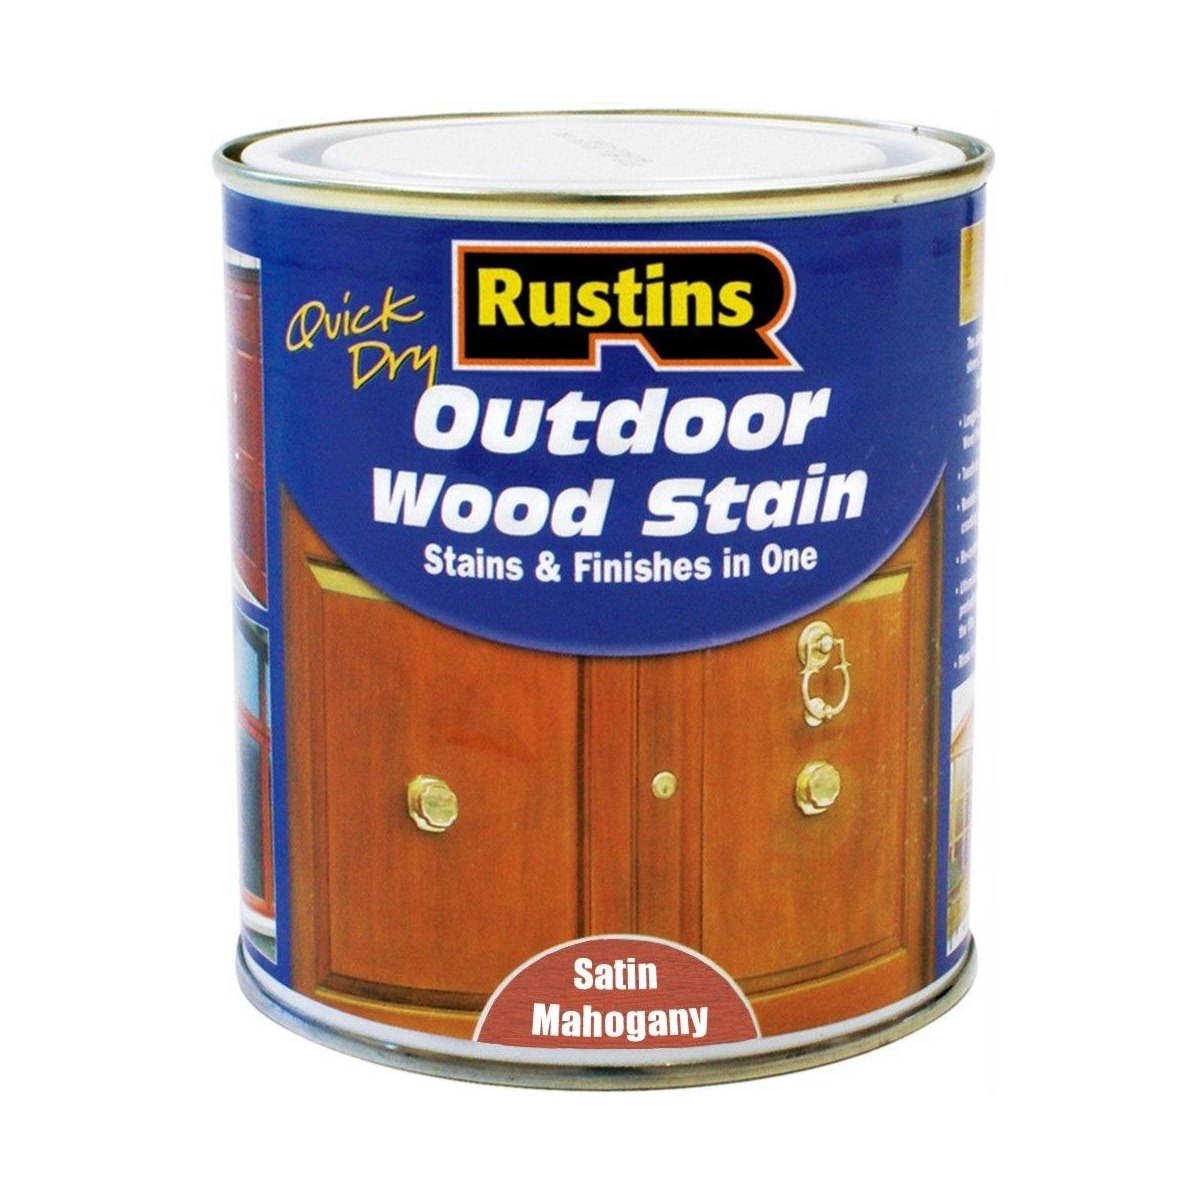 Rustins Quick Dry Outdoor Wood Stain Mahogany 1 Litre